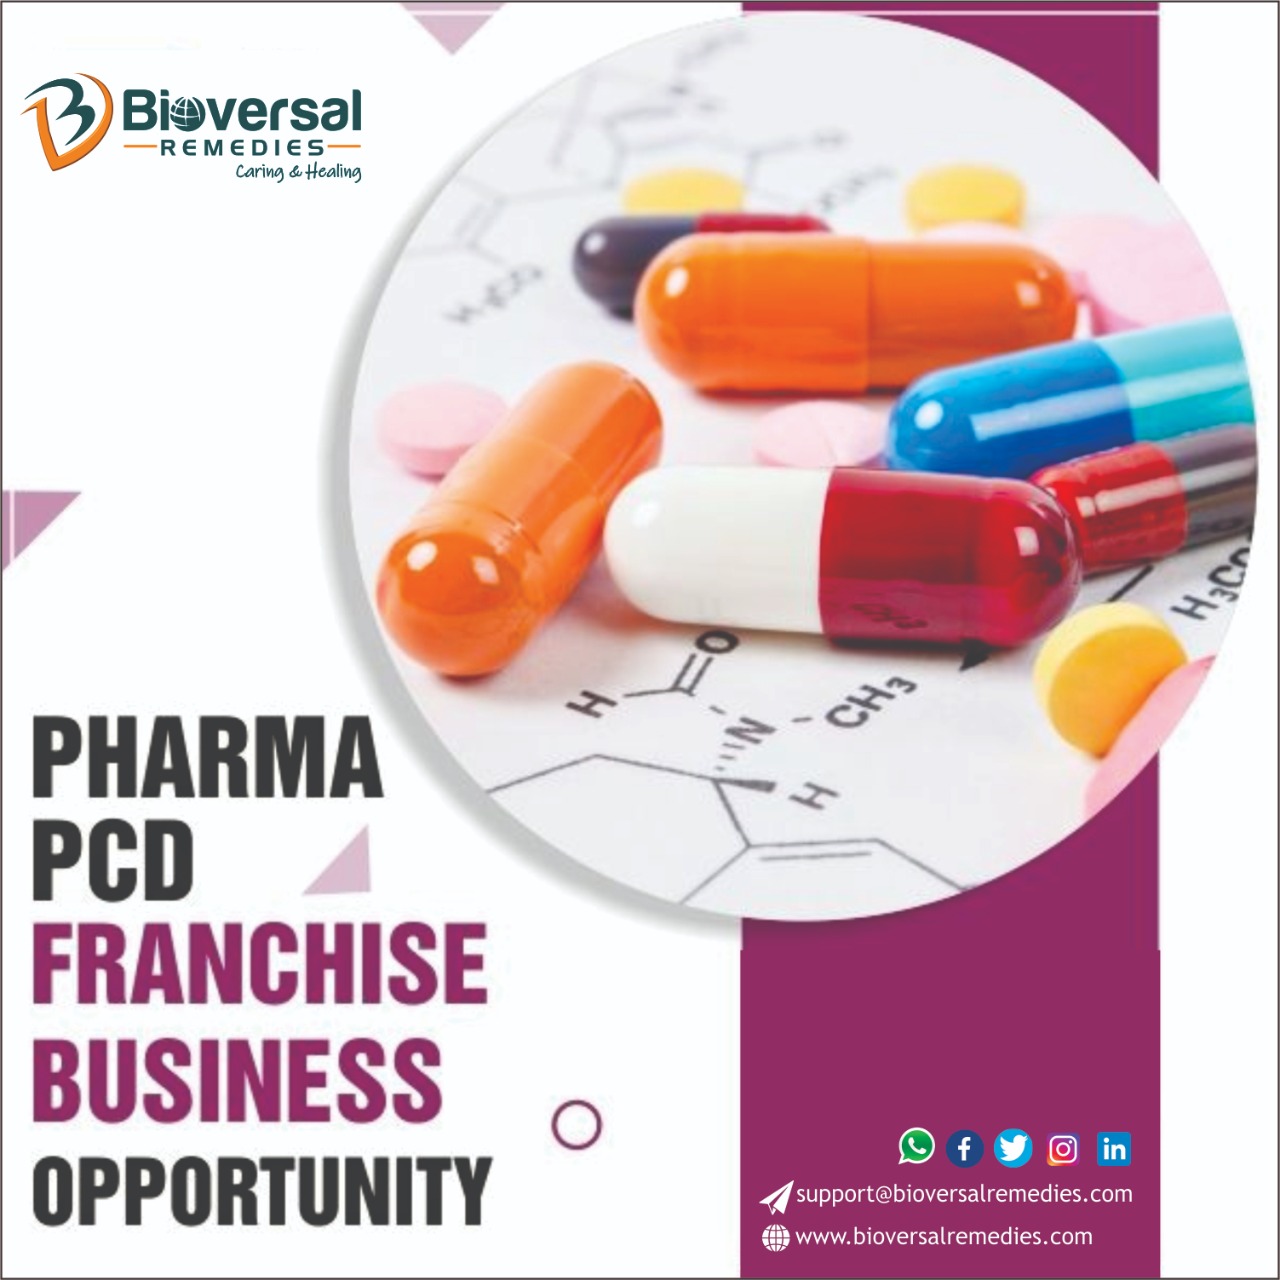 Benefits of a Pharma Franchise Business